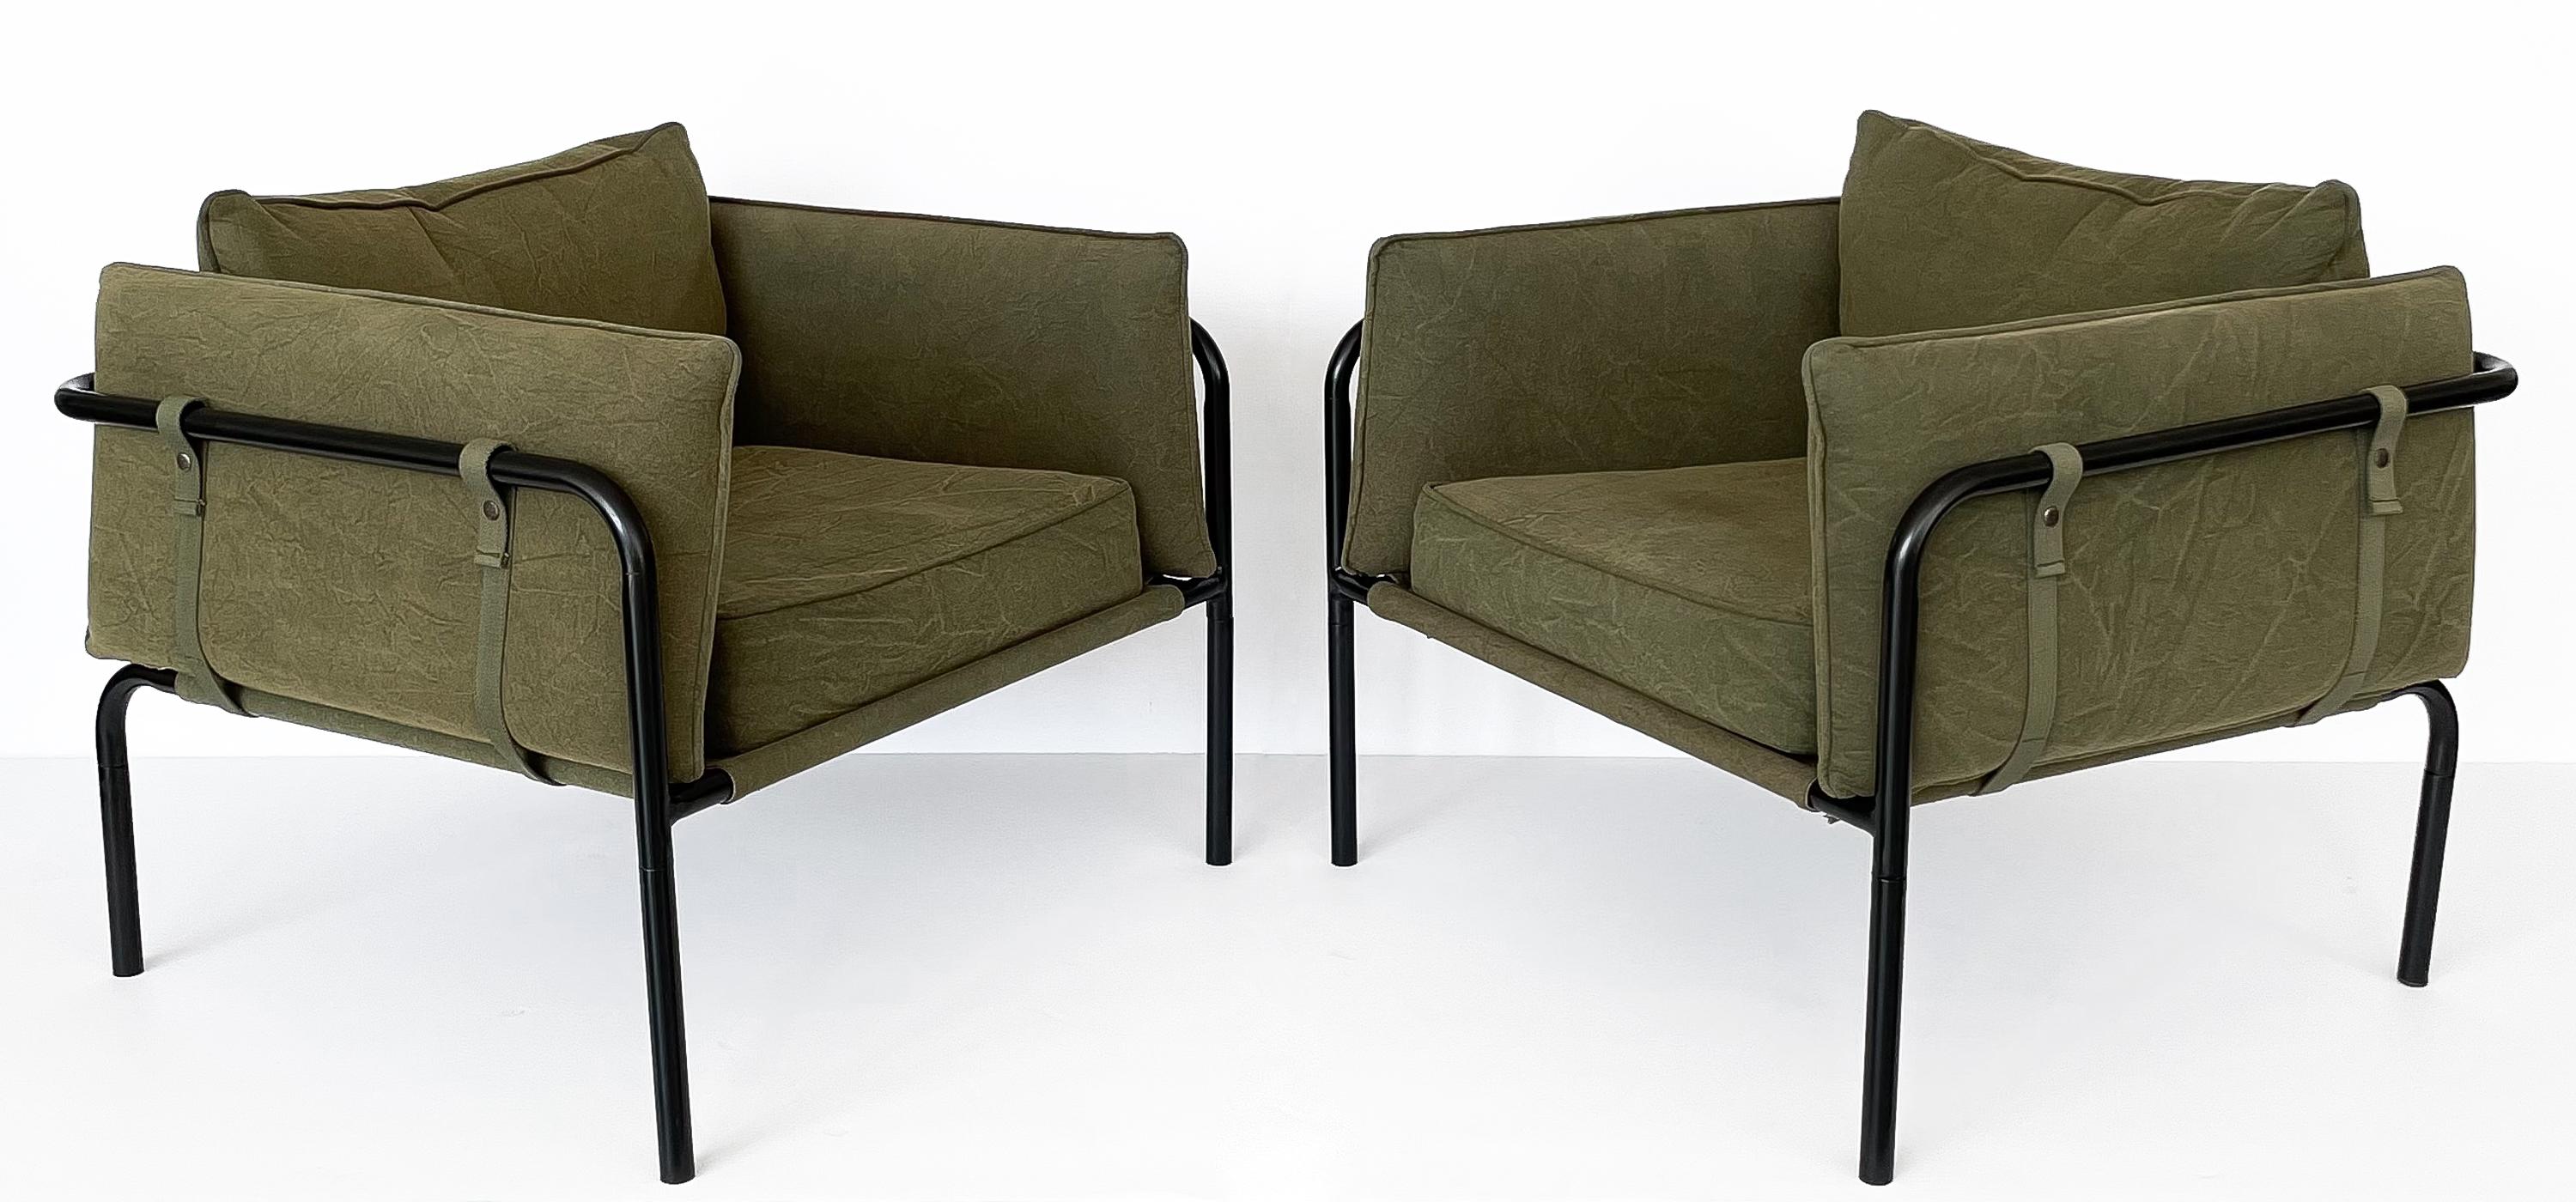 Pair of Postmodern lounge chairs with canvas upholstery, circa late 20th century. This pair of chairs feature a black enameled tubular framework with canvas sling seat, canvas cushions and woven straps with snap buttons. A modern take on a classic